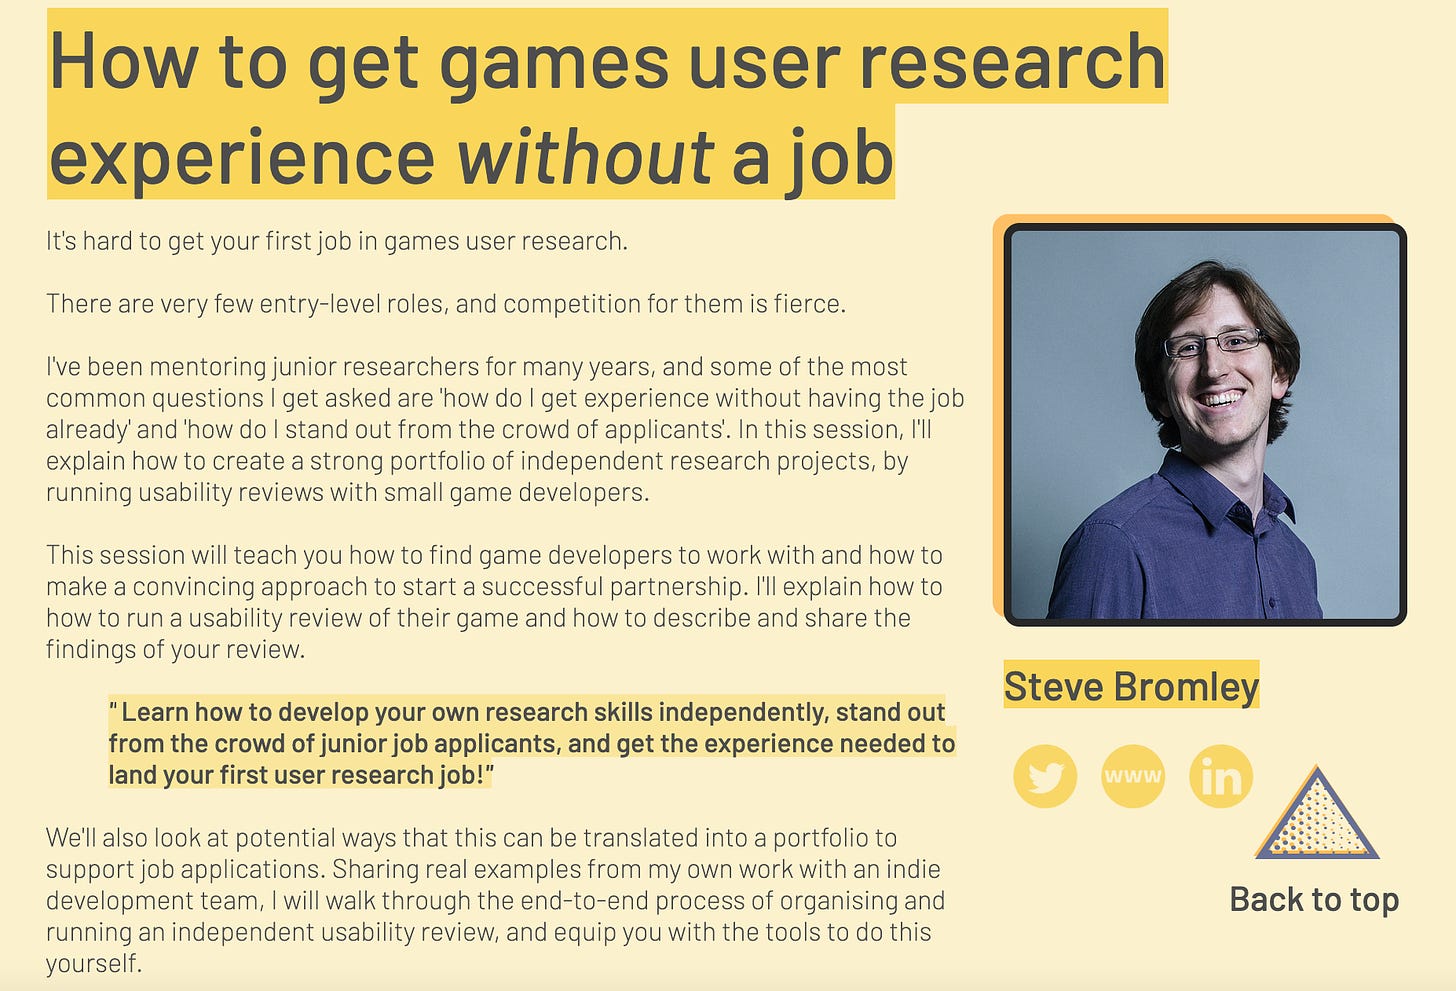 Steve Bromley's talk "How to get games user research experience with a job'